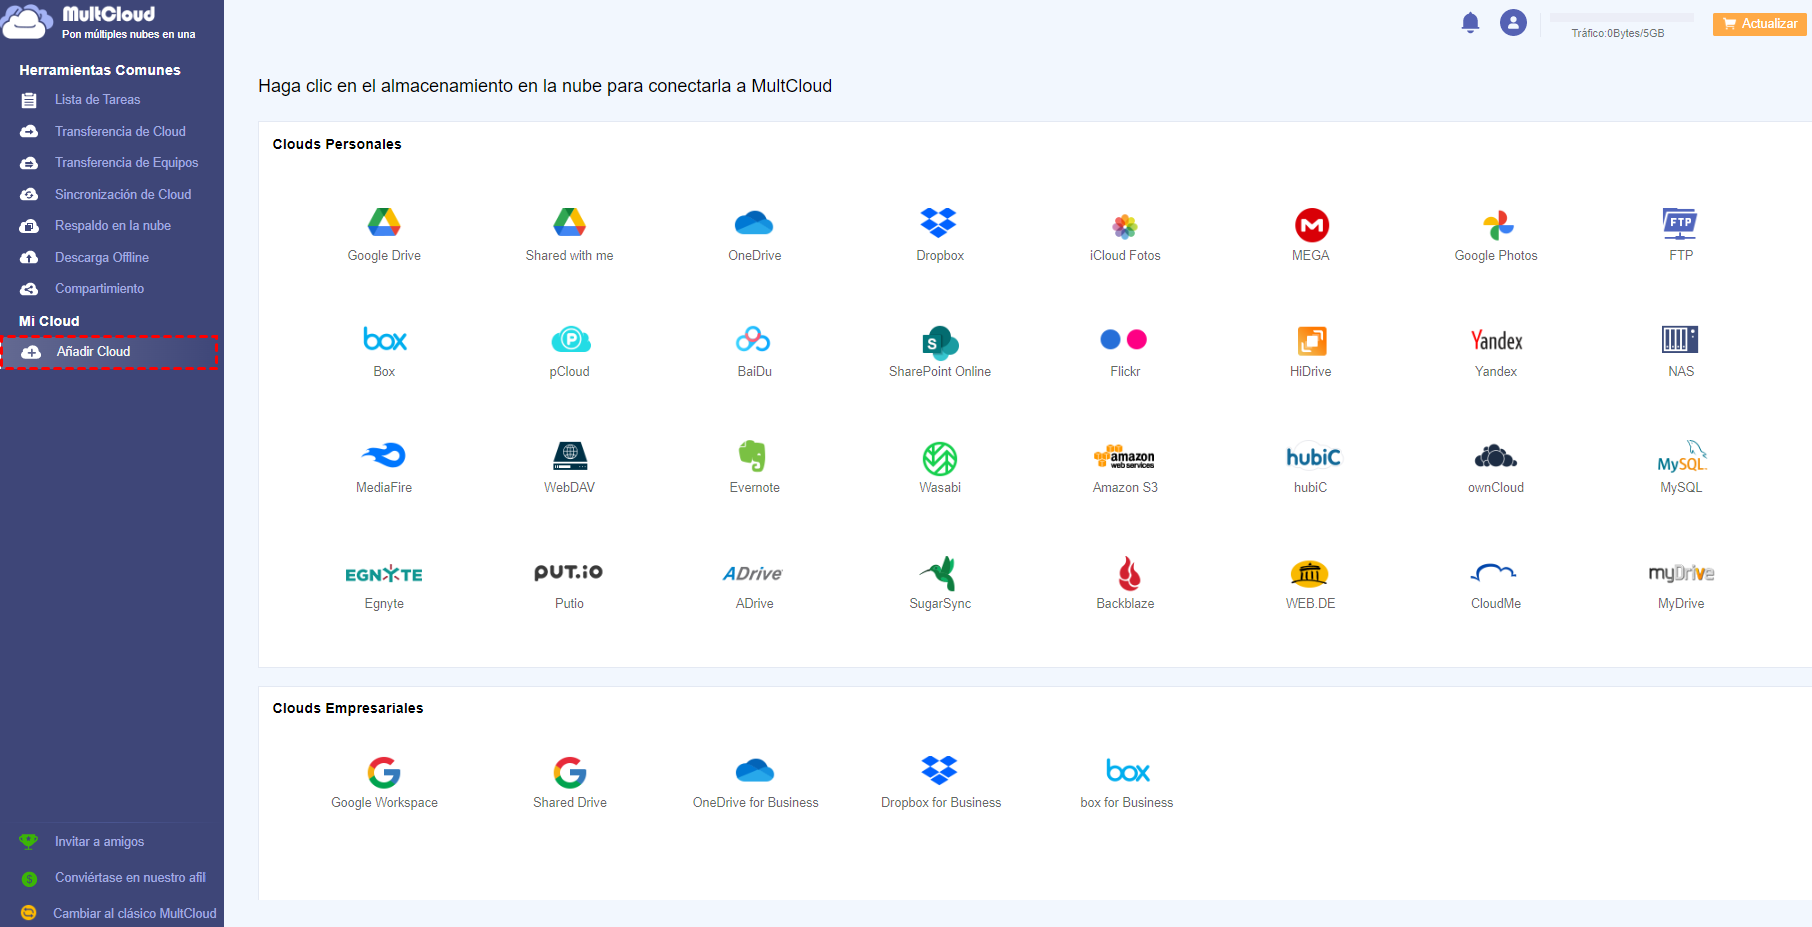 Add Google Drive and Google Workspace to MultCloud